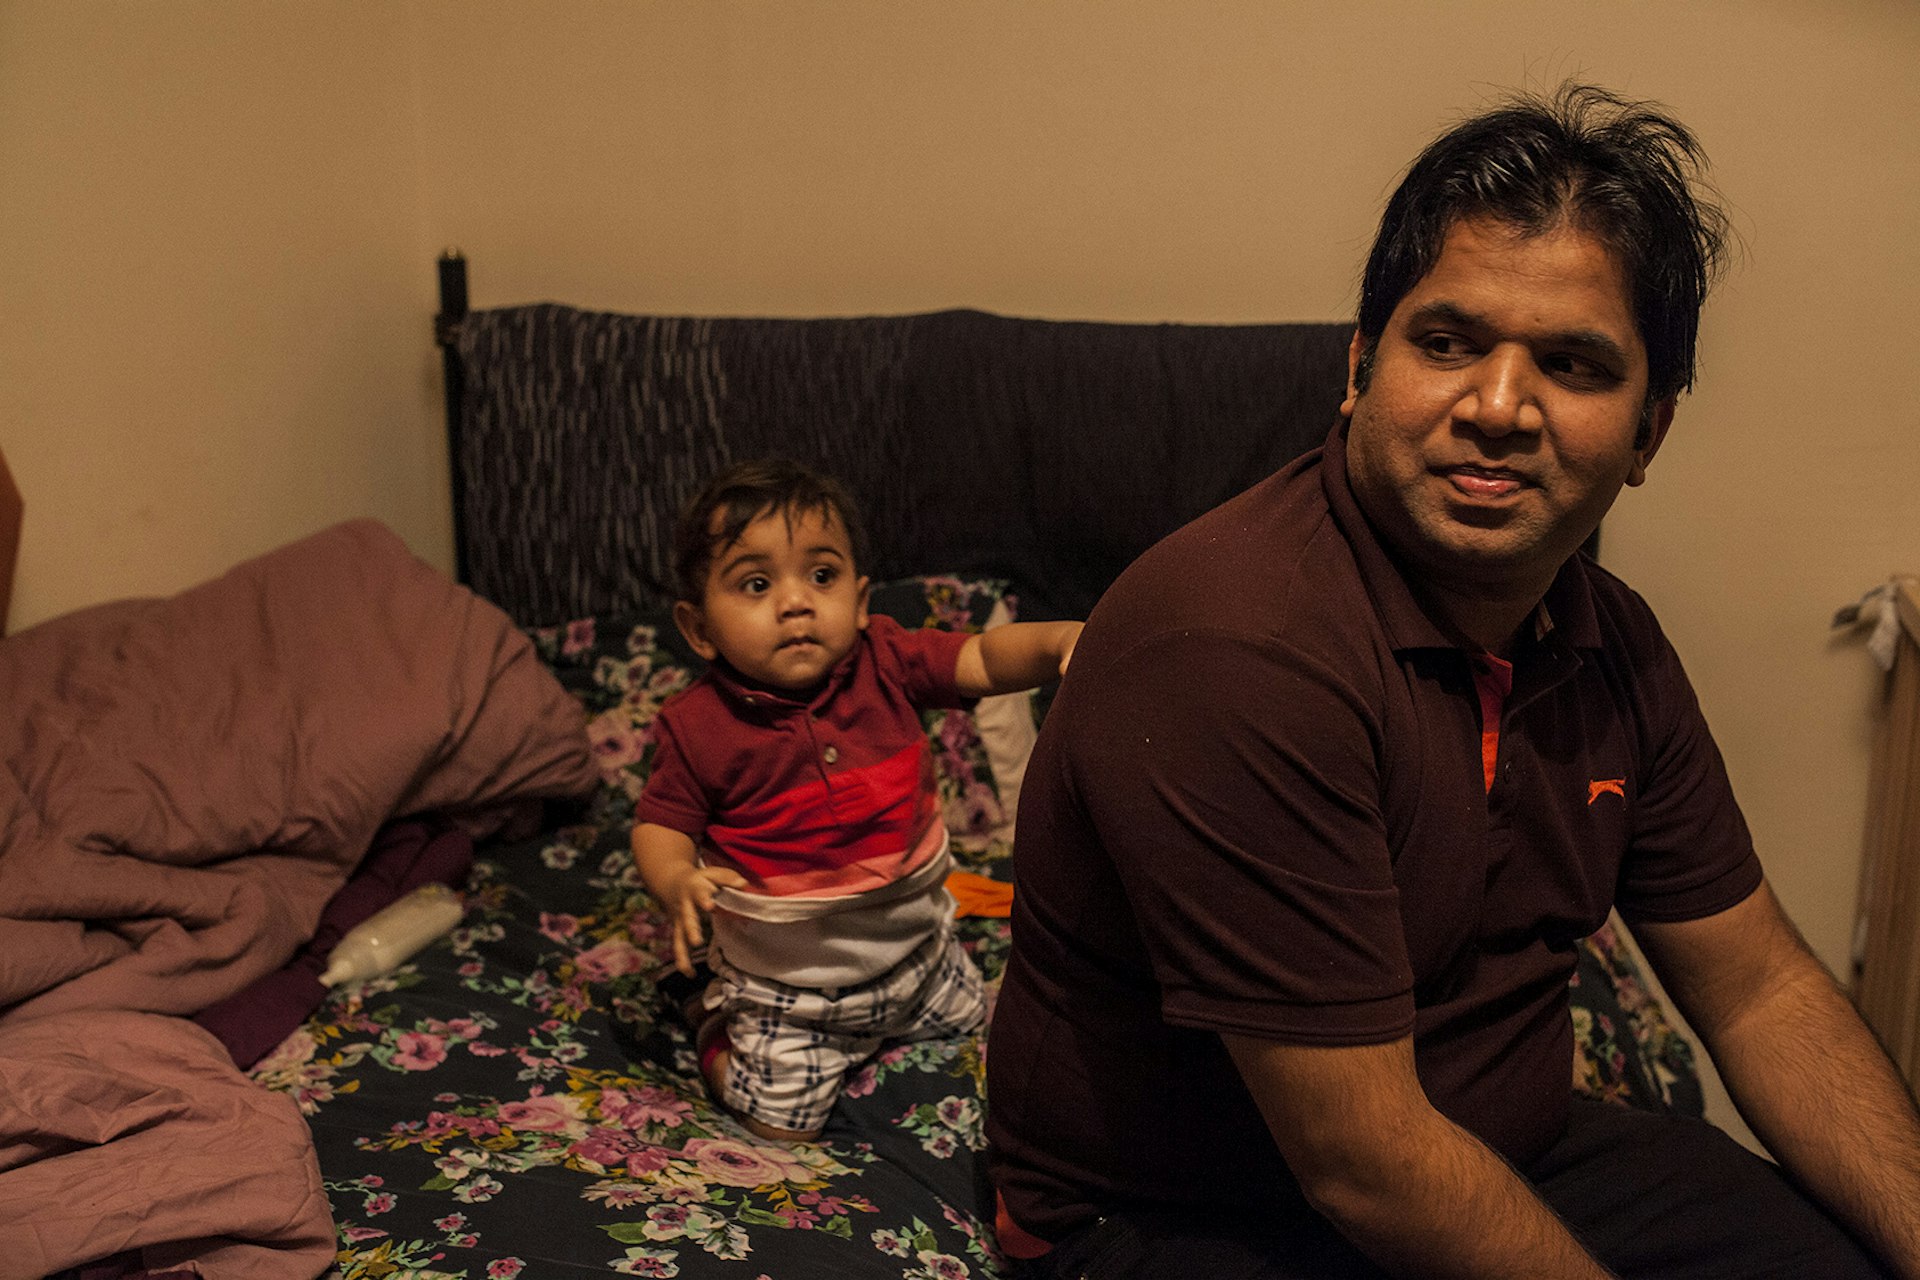 Asylum seekers in Britain face a system destined to destroy their mental health